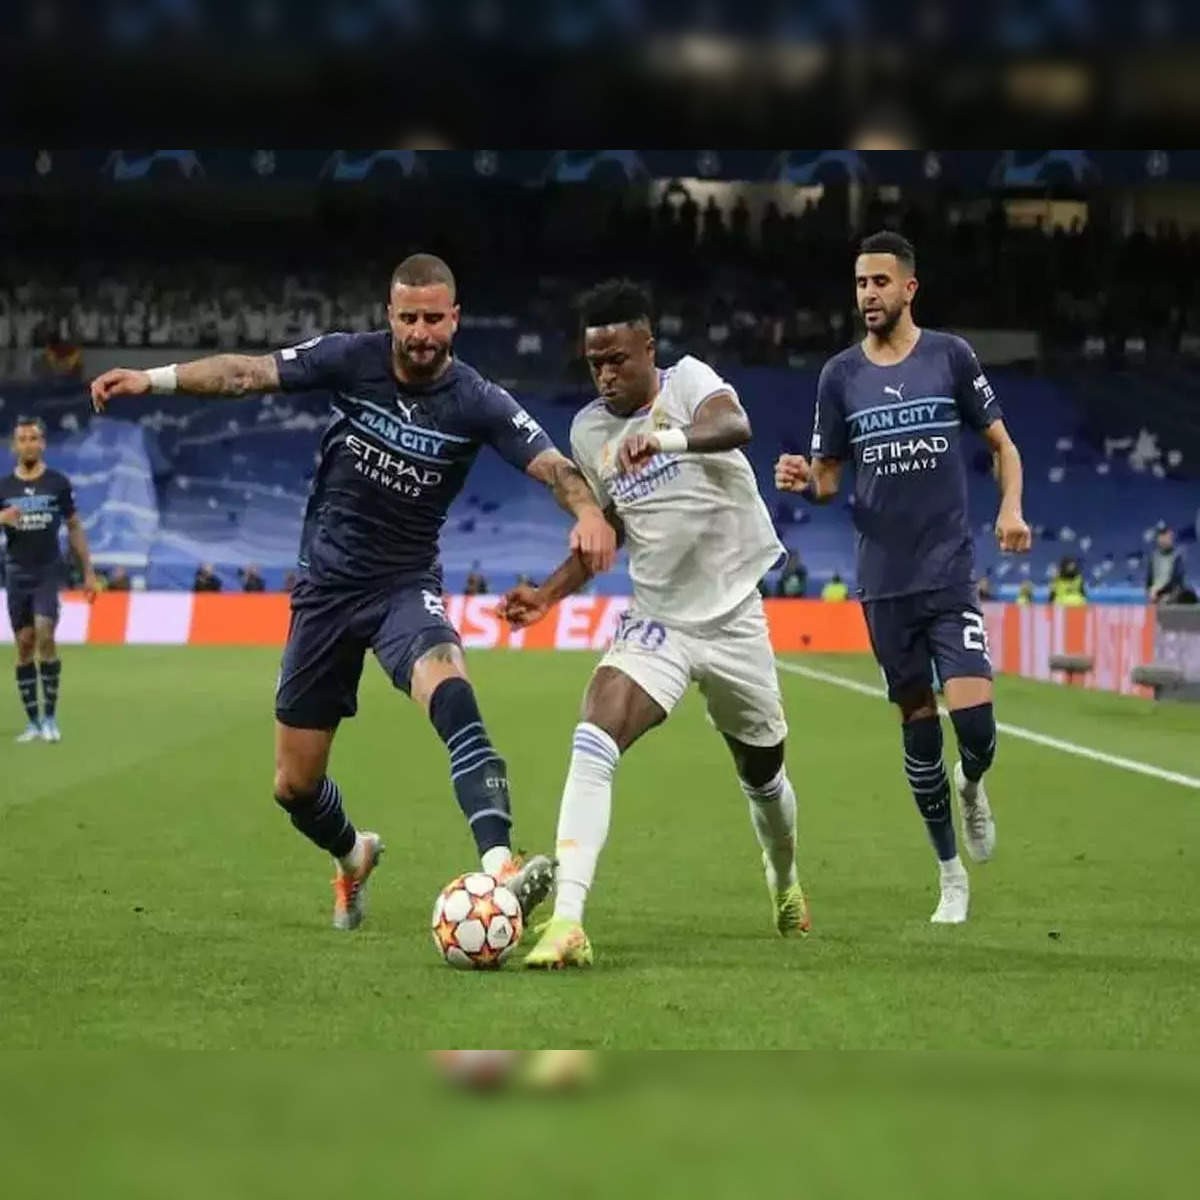 Real Madrid vs Man City Live streaming Lineups, start time, head-to-head, how to watch UEFA Champions League semi-final match for free